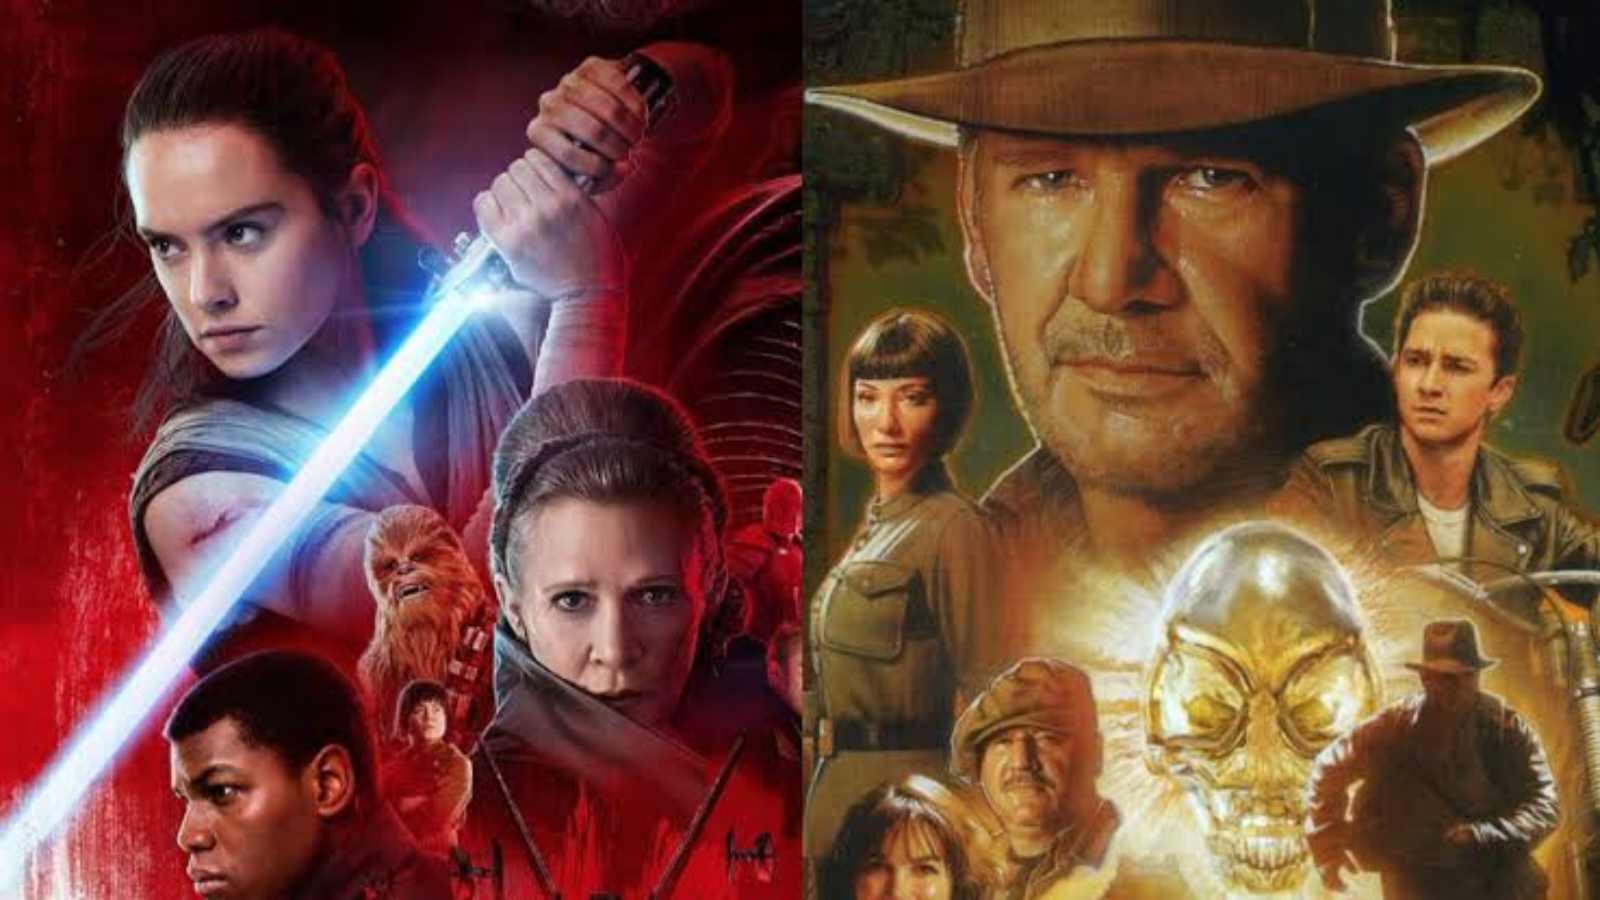 Star Wars and Indiana Jones franchise